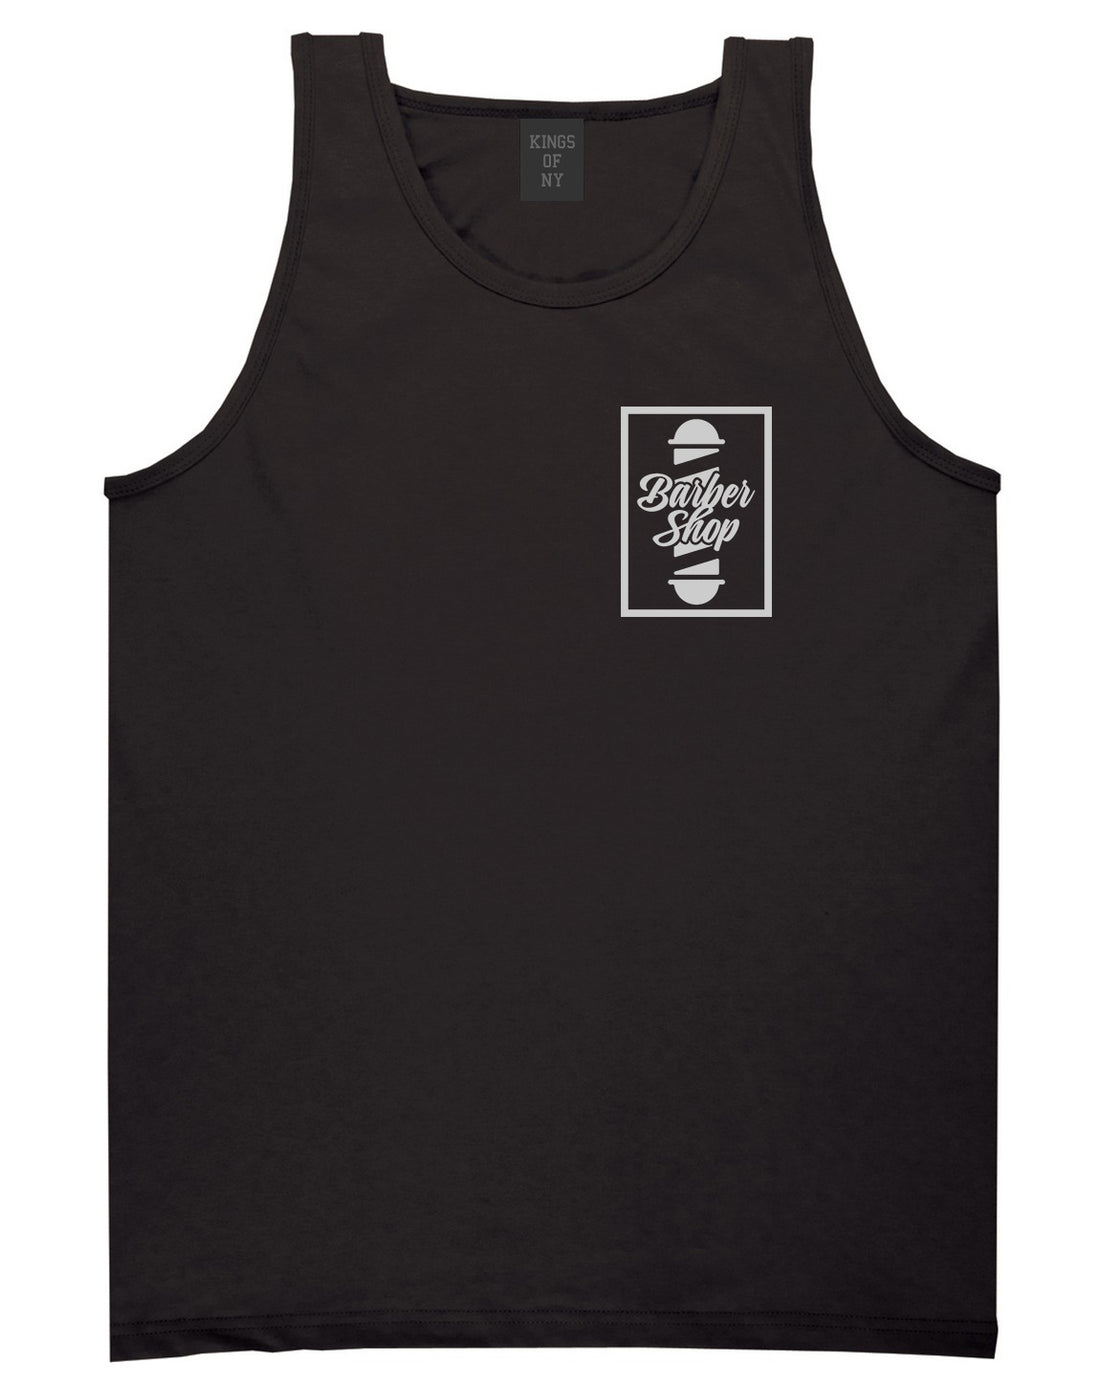 Barbershop Pole Chest Black Tank Top Shirt by Kings Of NY